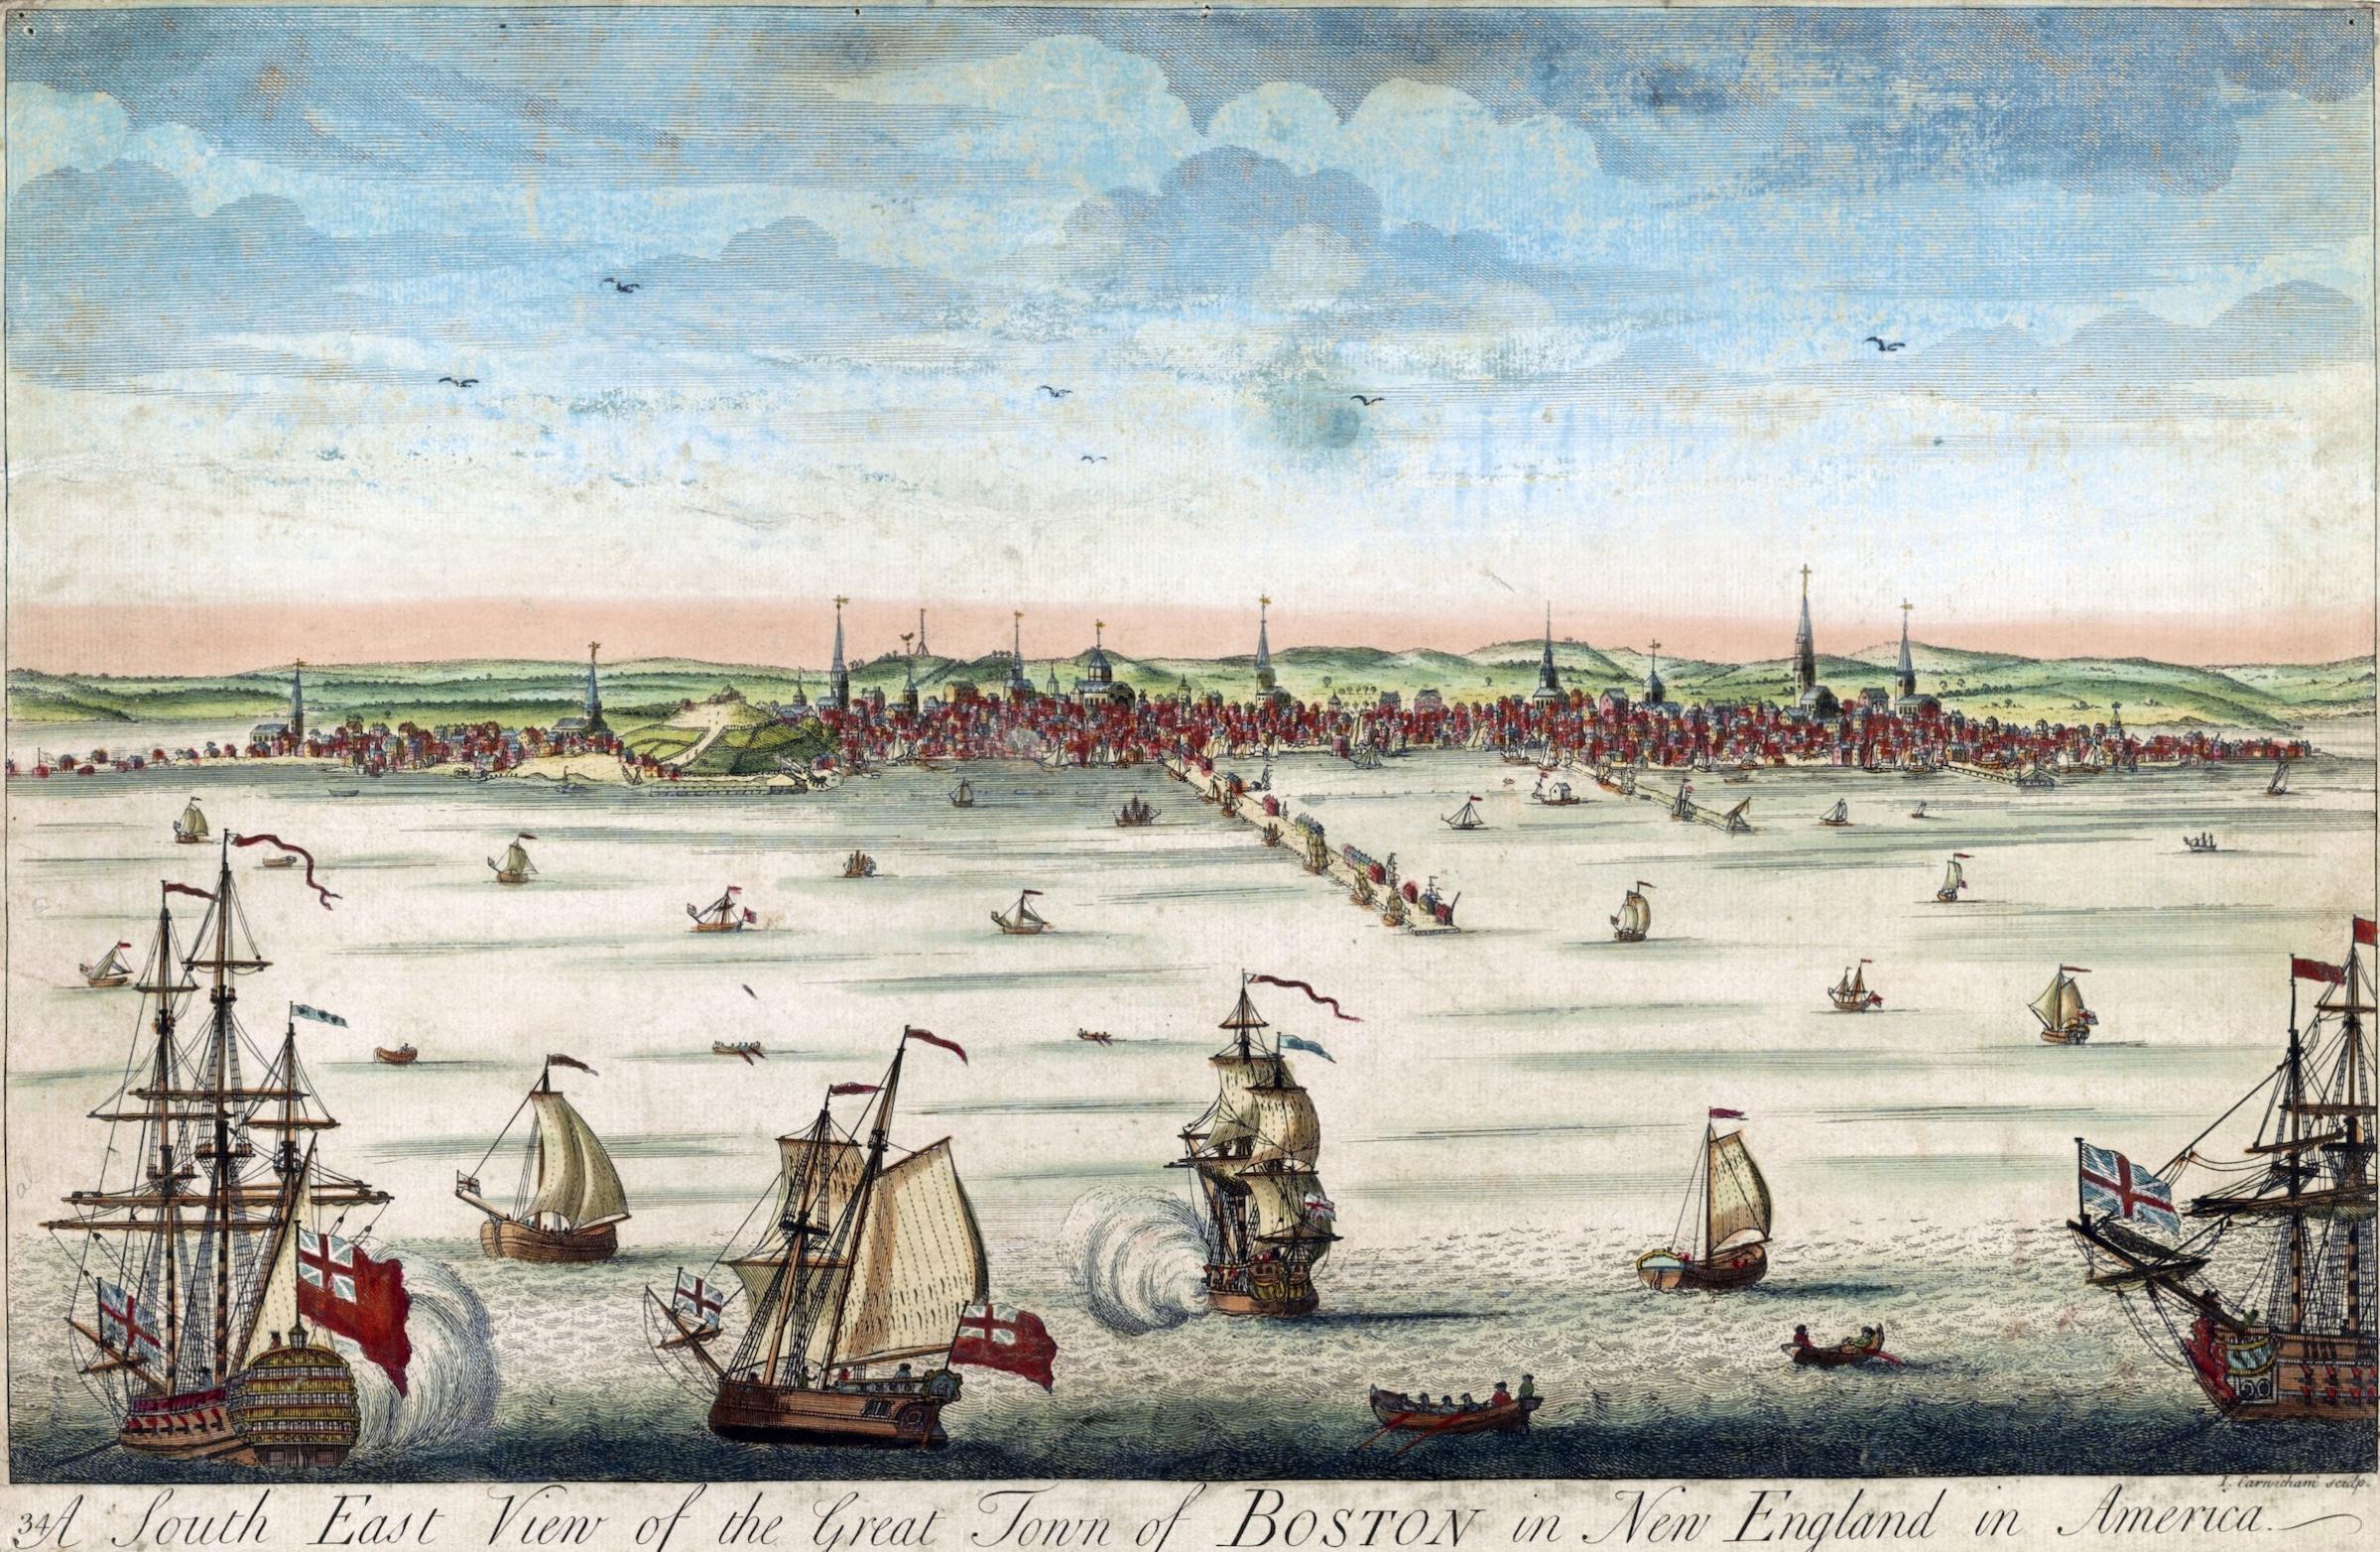 A view of Boston from the harbour, with ships in the foreground.